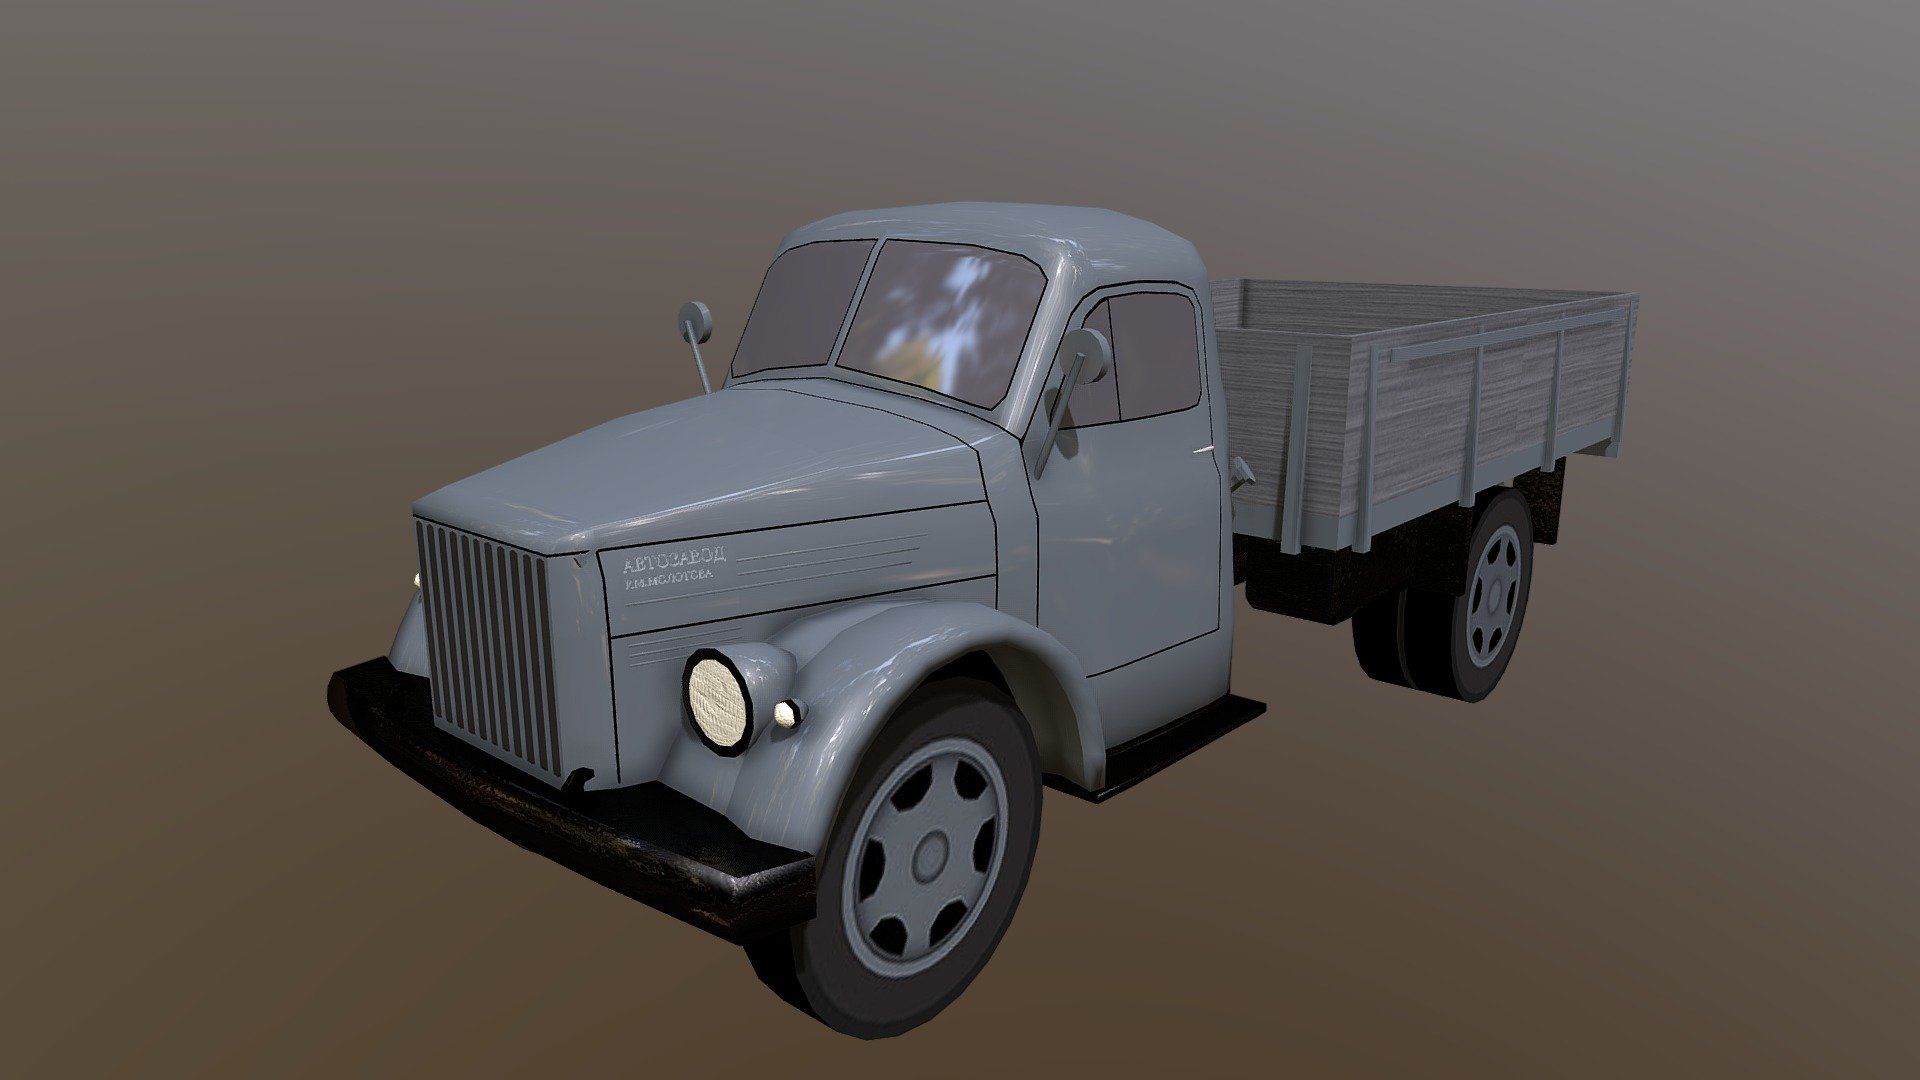 Asset for Cities Skylines. Serial production of the GAZ-51 model began in 1946. The car had a bonnet, which was originally made of wood, but eventually became all-metal. Very soon it became the most massive truck in the USSR, its assembly was also organized at enterprises in Odessa and Irkutsk. Many cars were exported to countries in Asia, Africa, Eastern Europe, and Finland. Licensed car production began in China (Yuejin NJ130), DPRK (Sungri-58) and Poland (Lublin-51) - The Soviet model GAZ-51 of 1946-1975 - 3D model by cr_monroe (@cr.monroe) 3d model